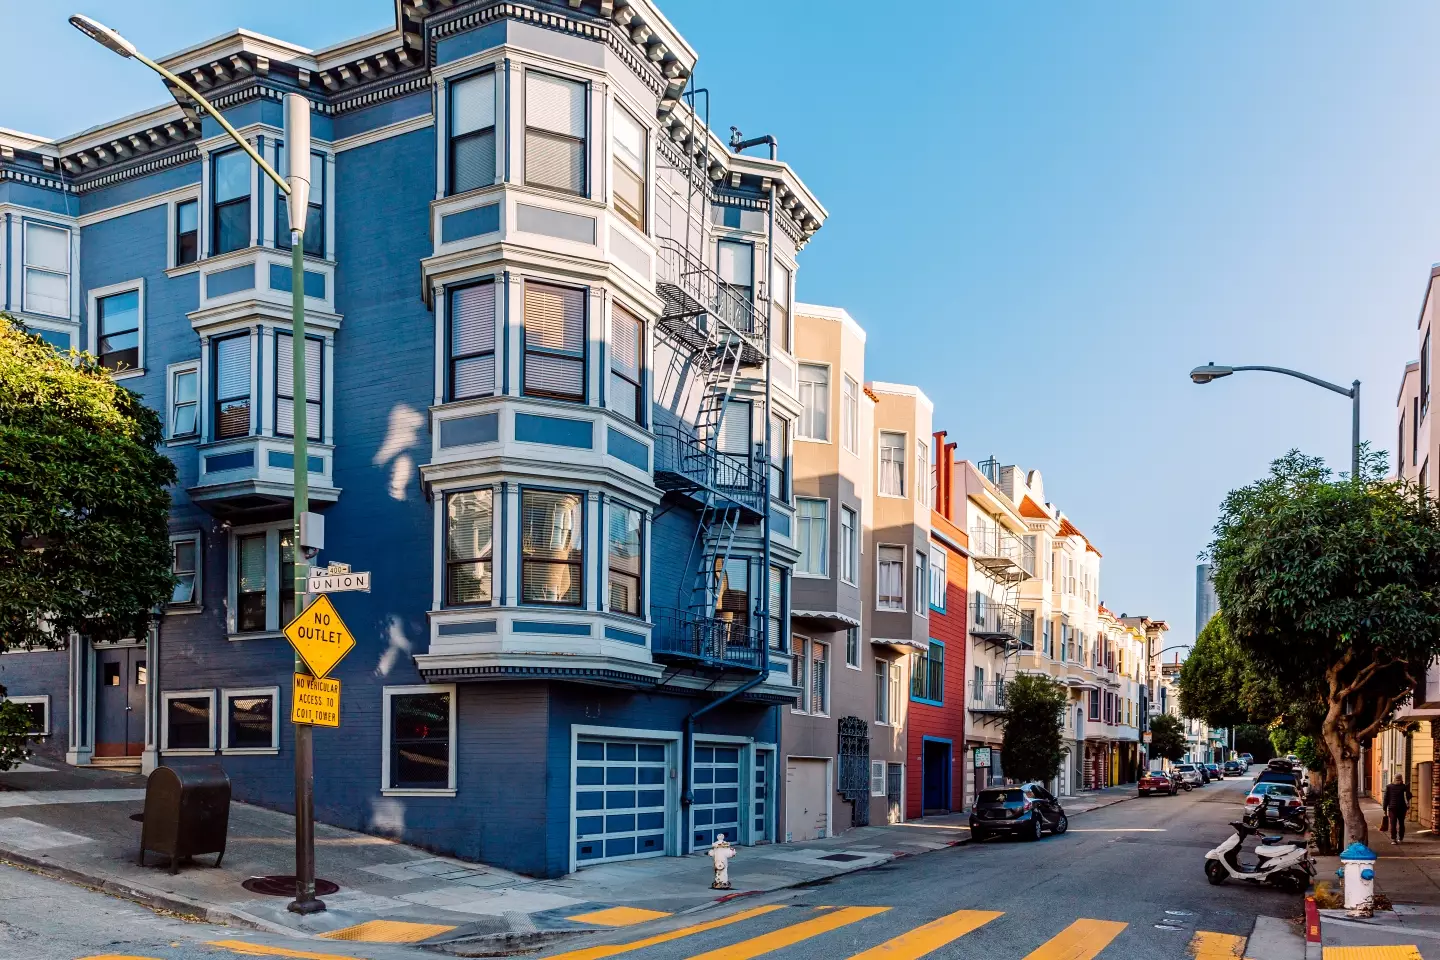 The median house price in San Fransisco is $1,482,500.